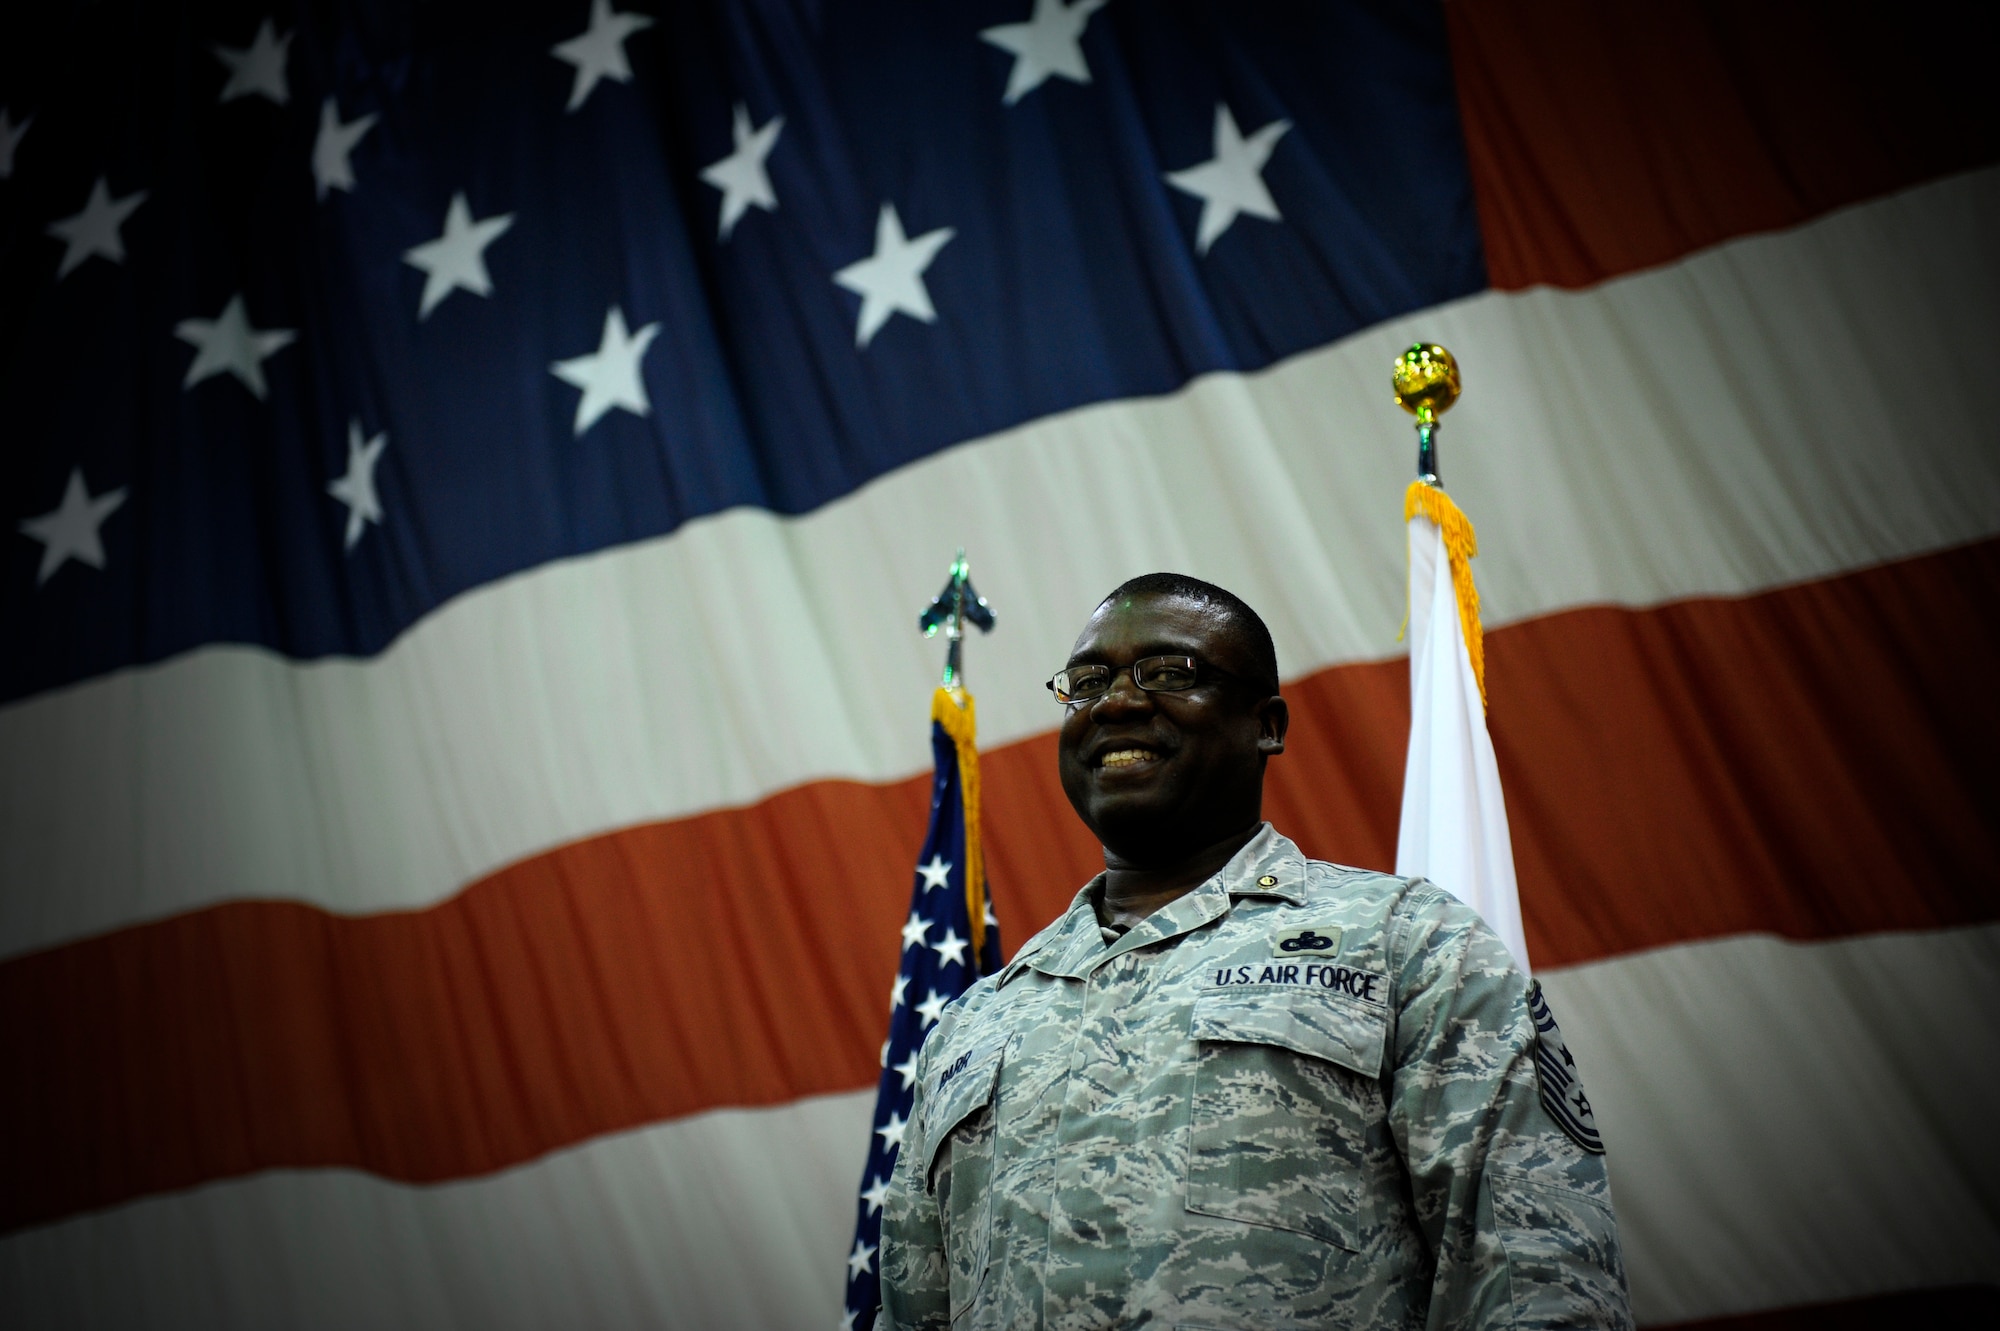 Chief Master Sgt. Lee Barr, 8th Fighter Wing command chief, smiles during his retirement ceremony at Kunsan Air Base, Republic of Korea, May 12, 2015. Barr spent 22 years in the security forces career field while supporting and deploying in Operations Desert Shield and Storm, Southern Watch, Noble Eagle, Iraqi Freedom and Odyssey Dawn. He will have served in the Air Force for 30 years when he retires in November. (U.S. Air Force photo by Senior Airman Taylor Curry/Released)